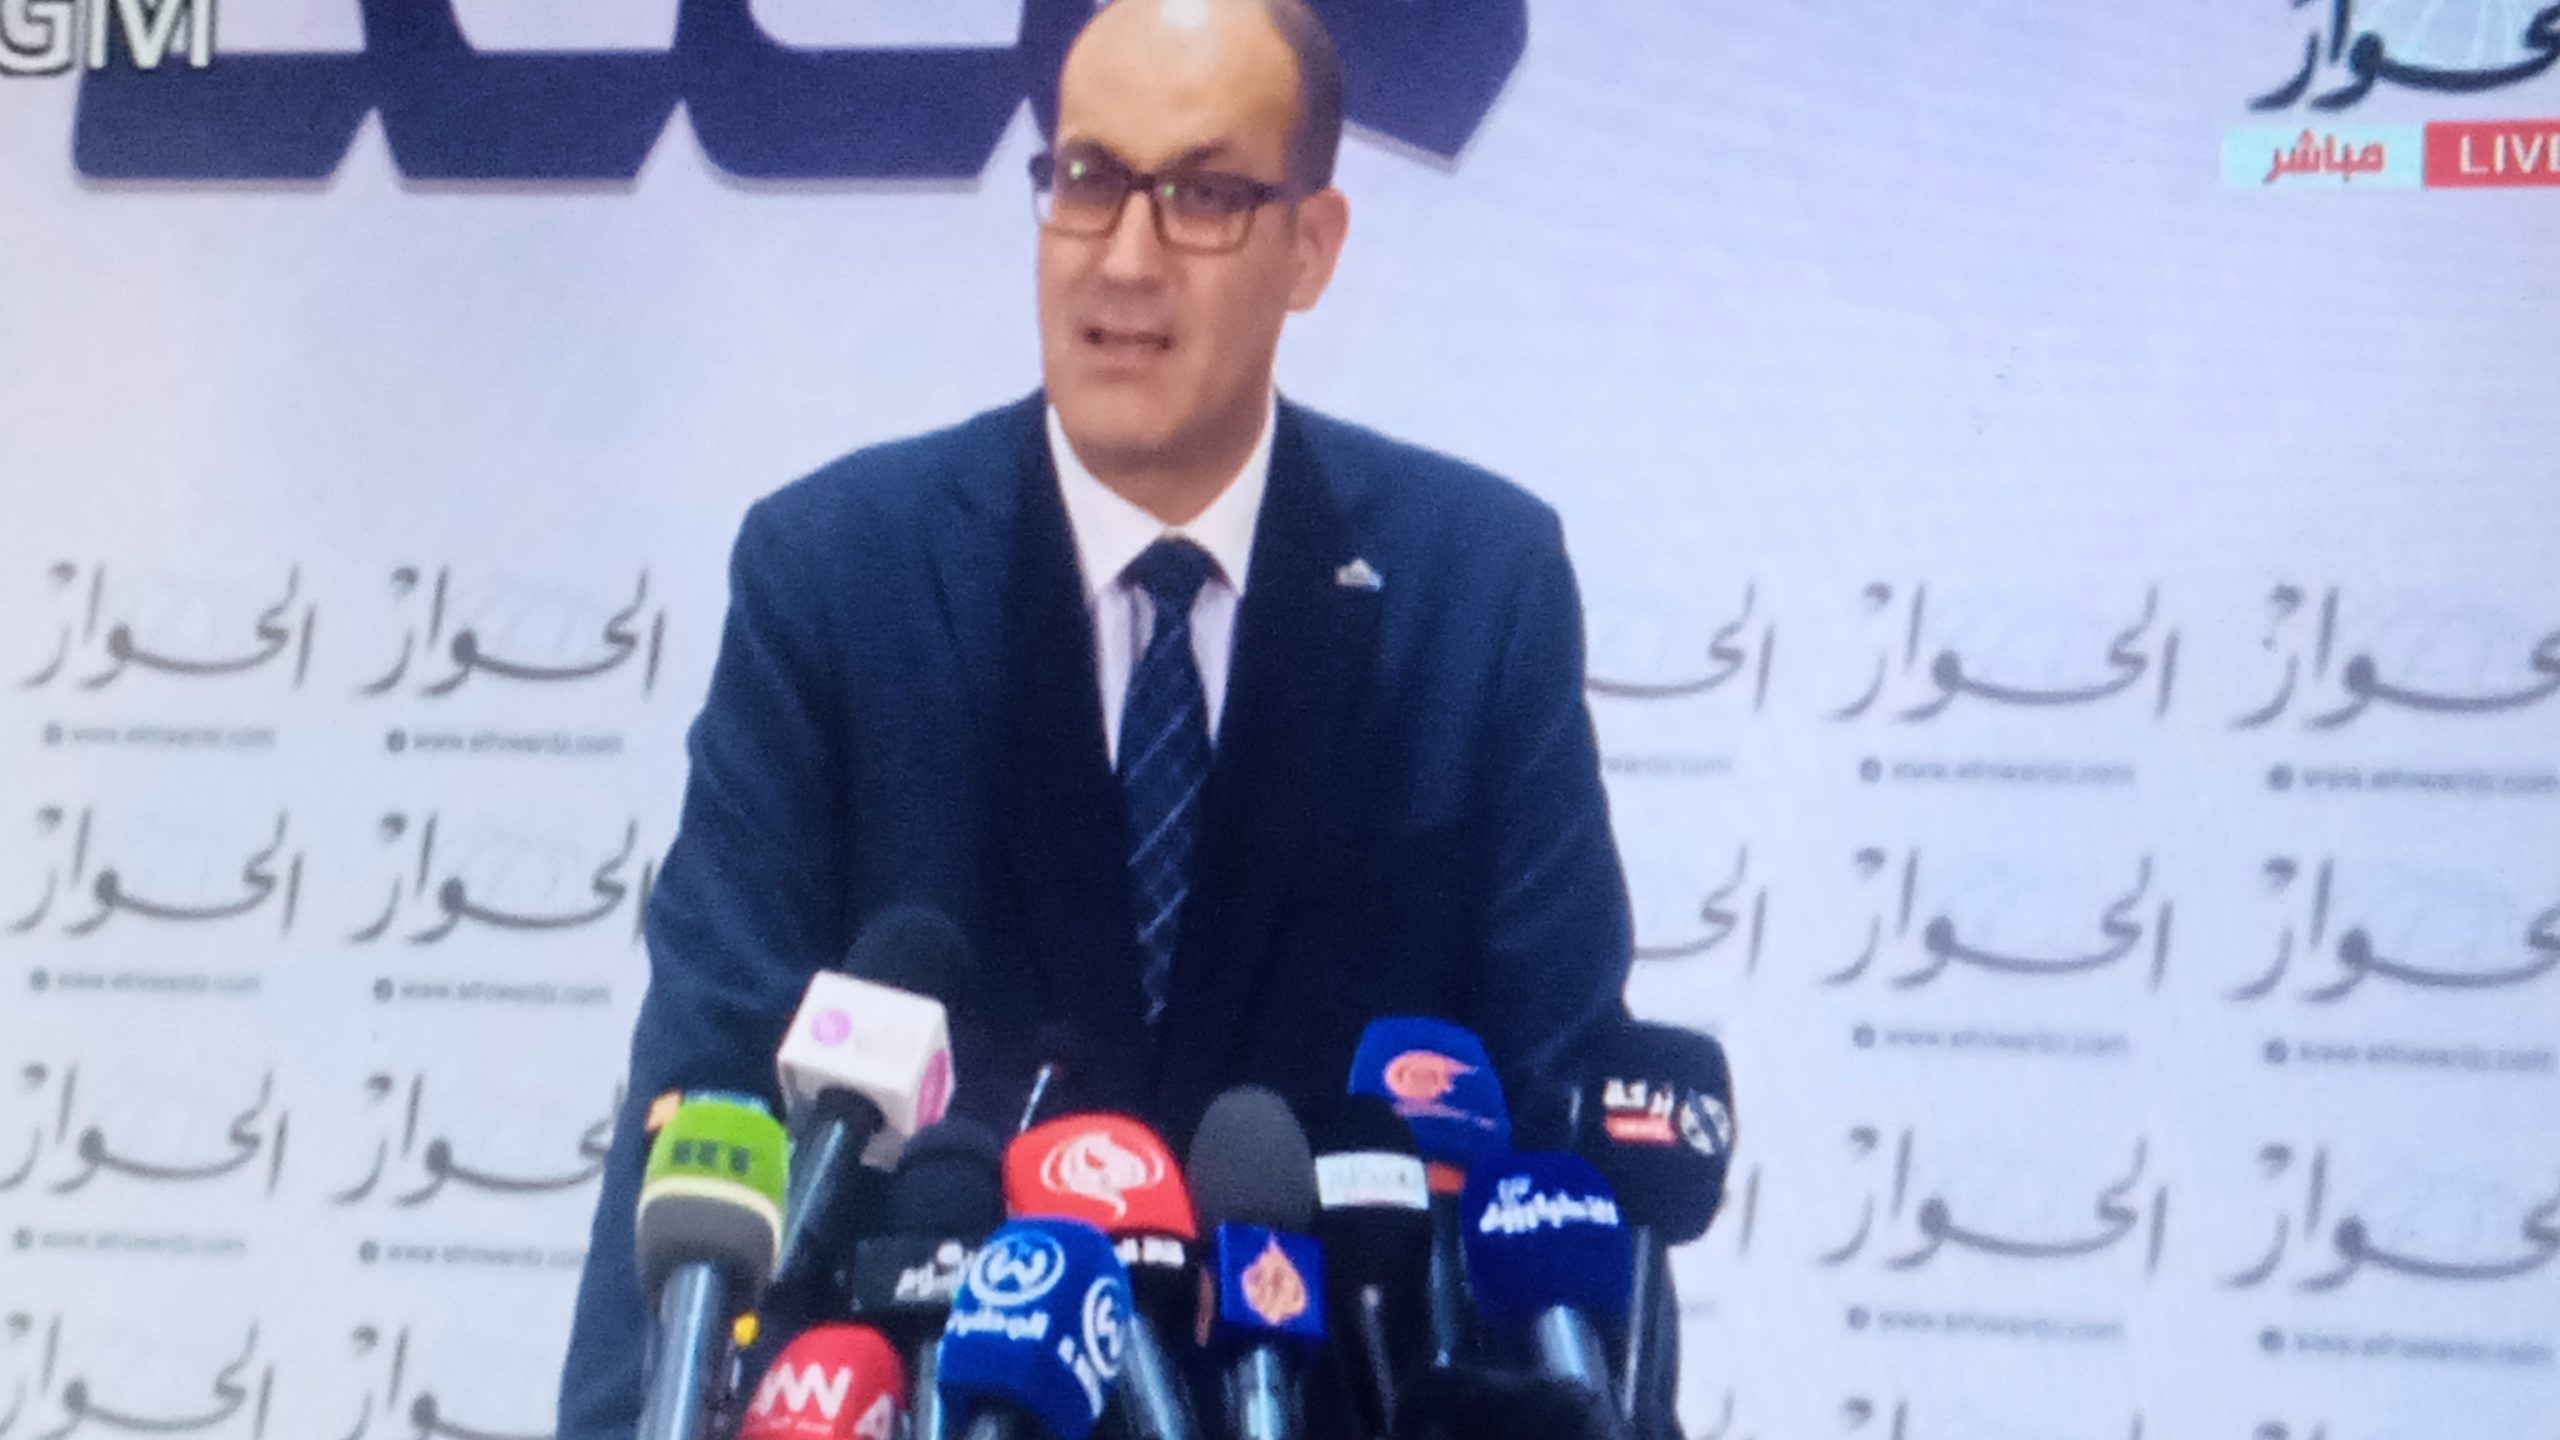 Head of the National Union of Judges to the Dialogue Forum: “Resisting the Al-Aqsa Flood is recognized in international laws and conventions” - Algerian Dialogue